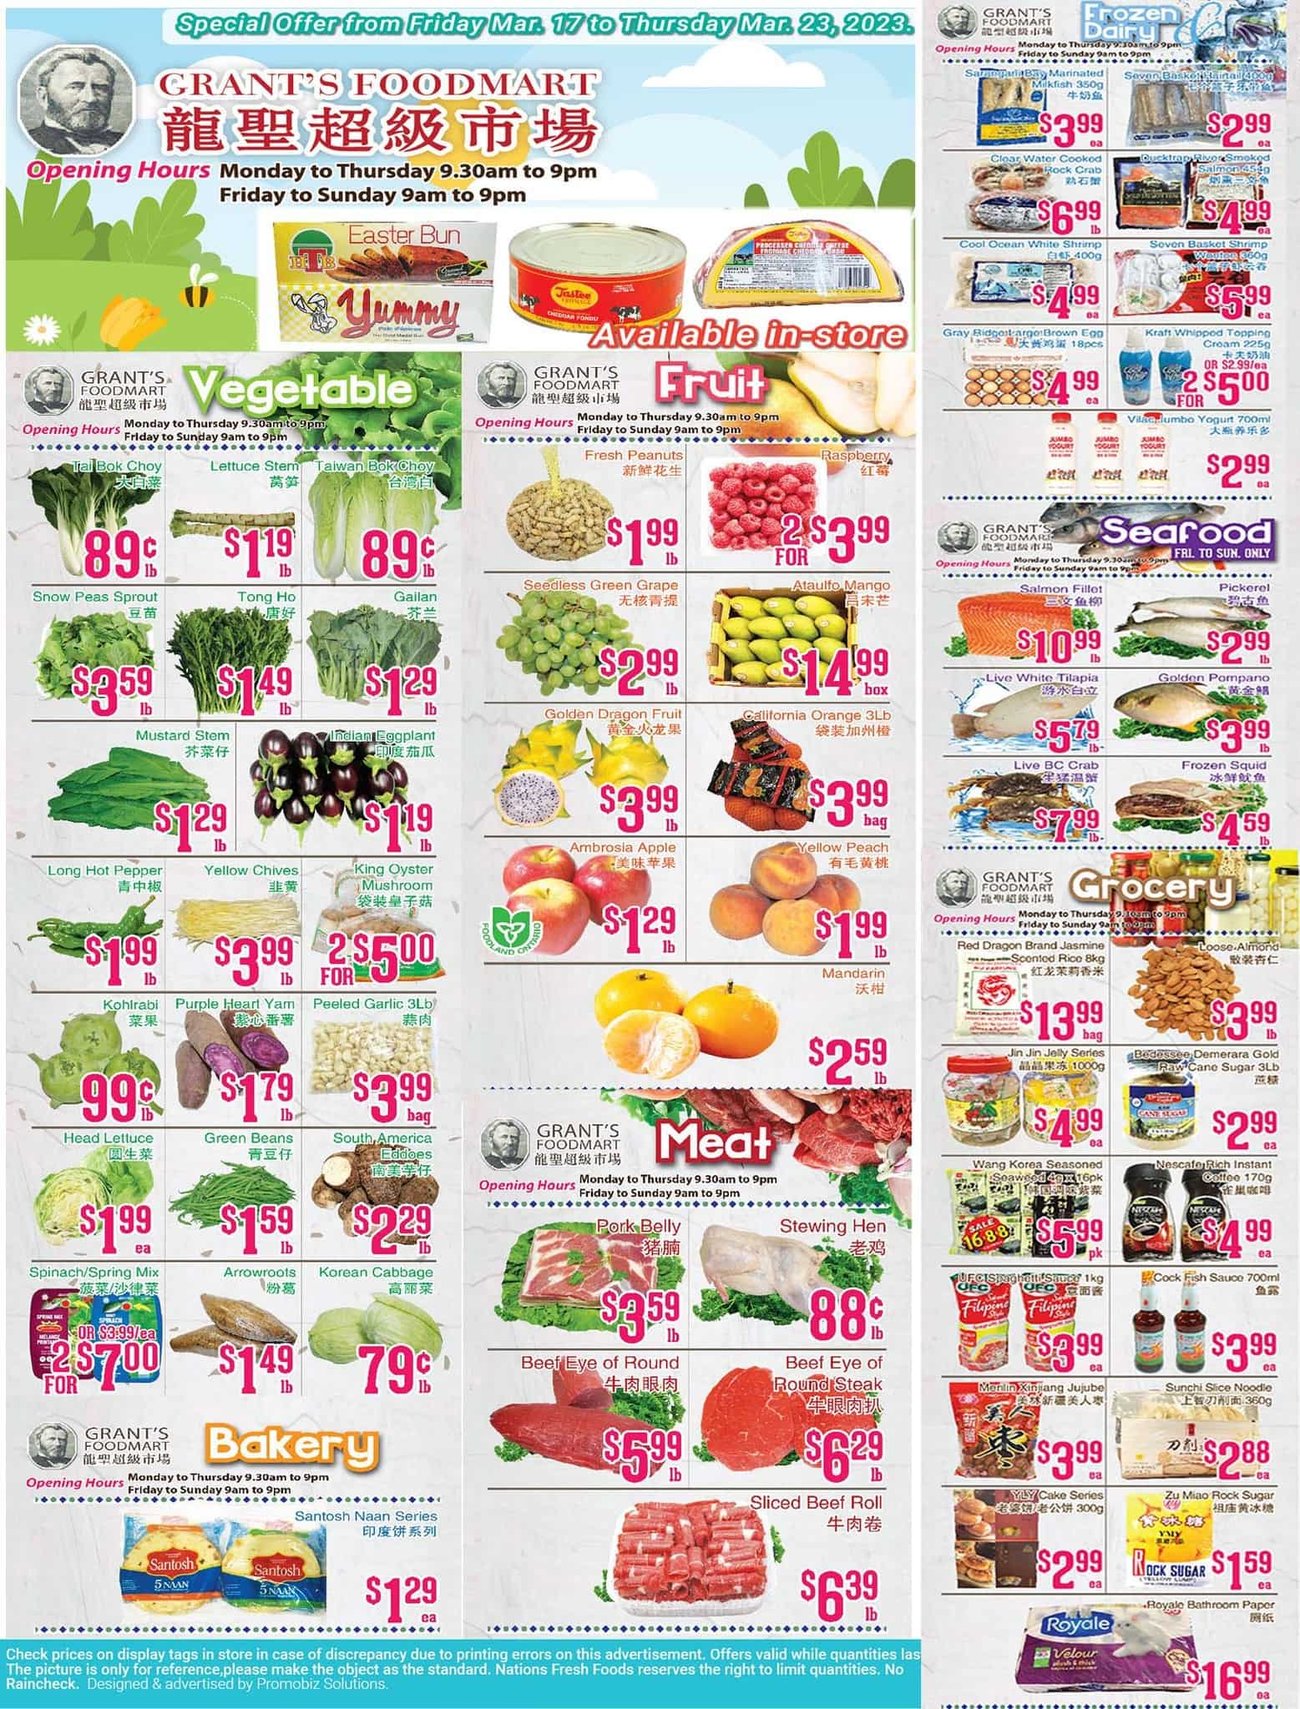 Grant's Foodmart - Weekly Flyer Specials - Page 1